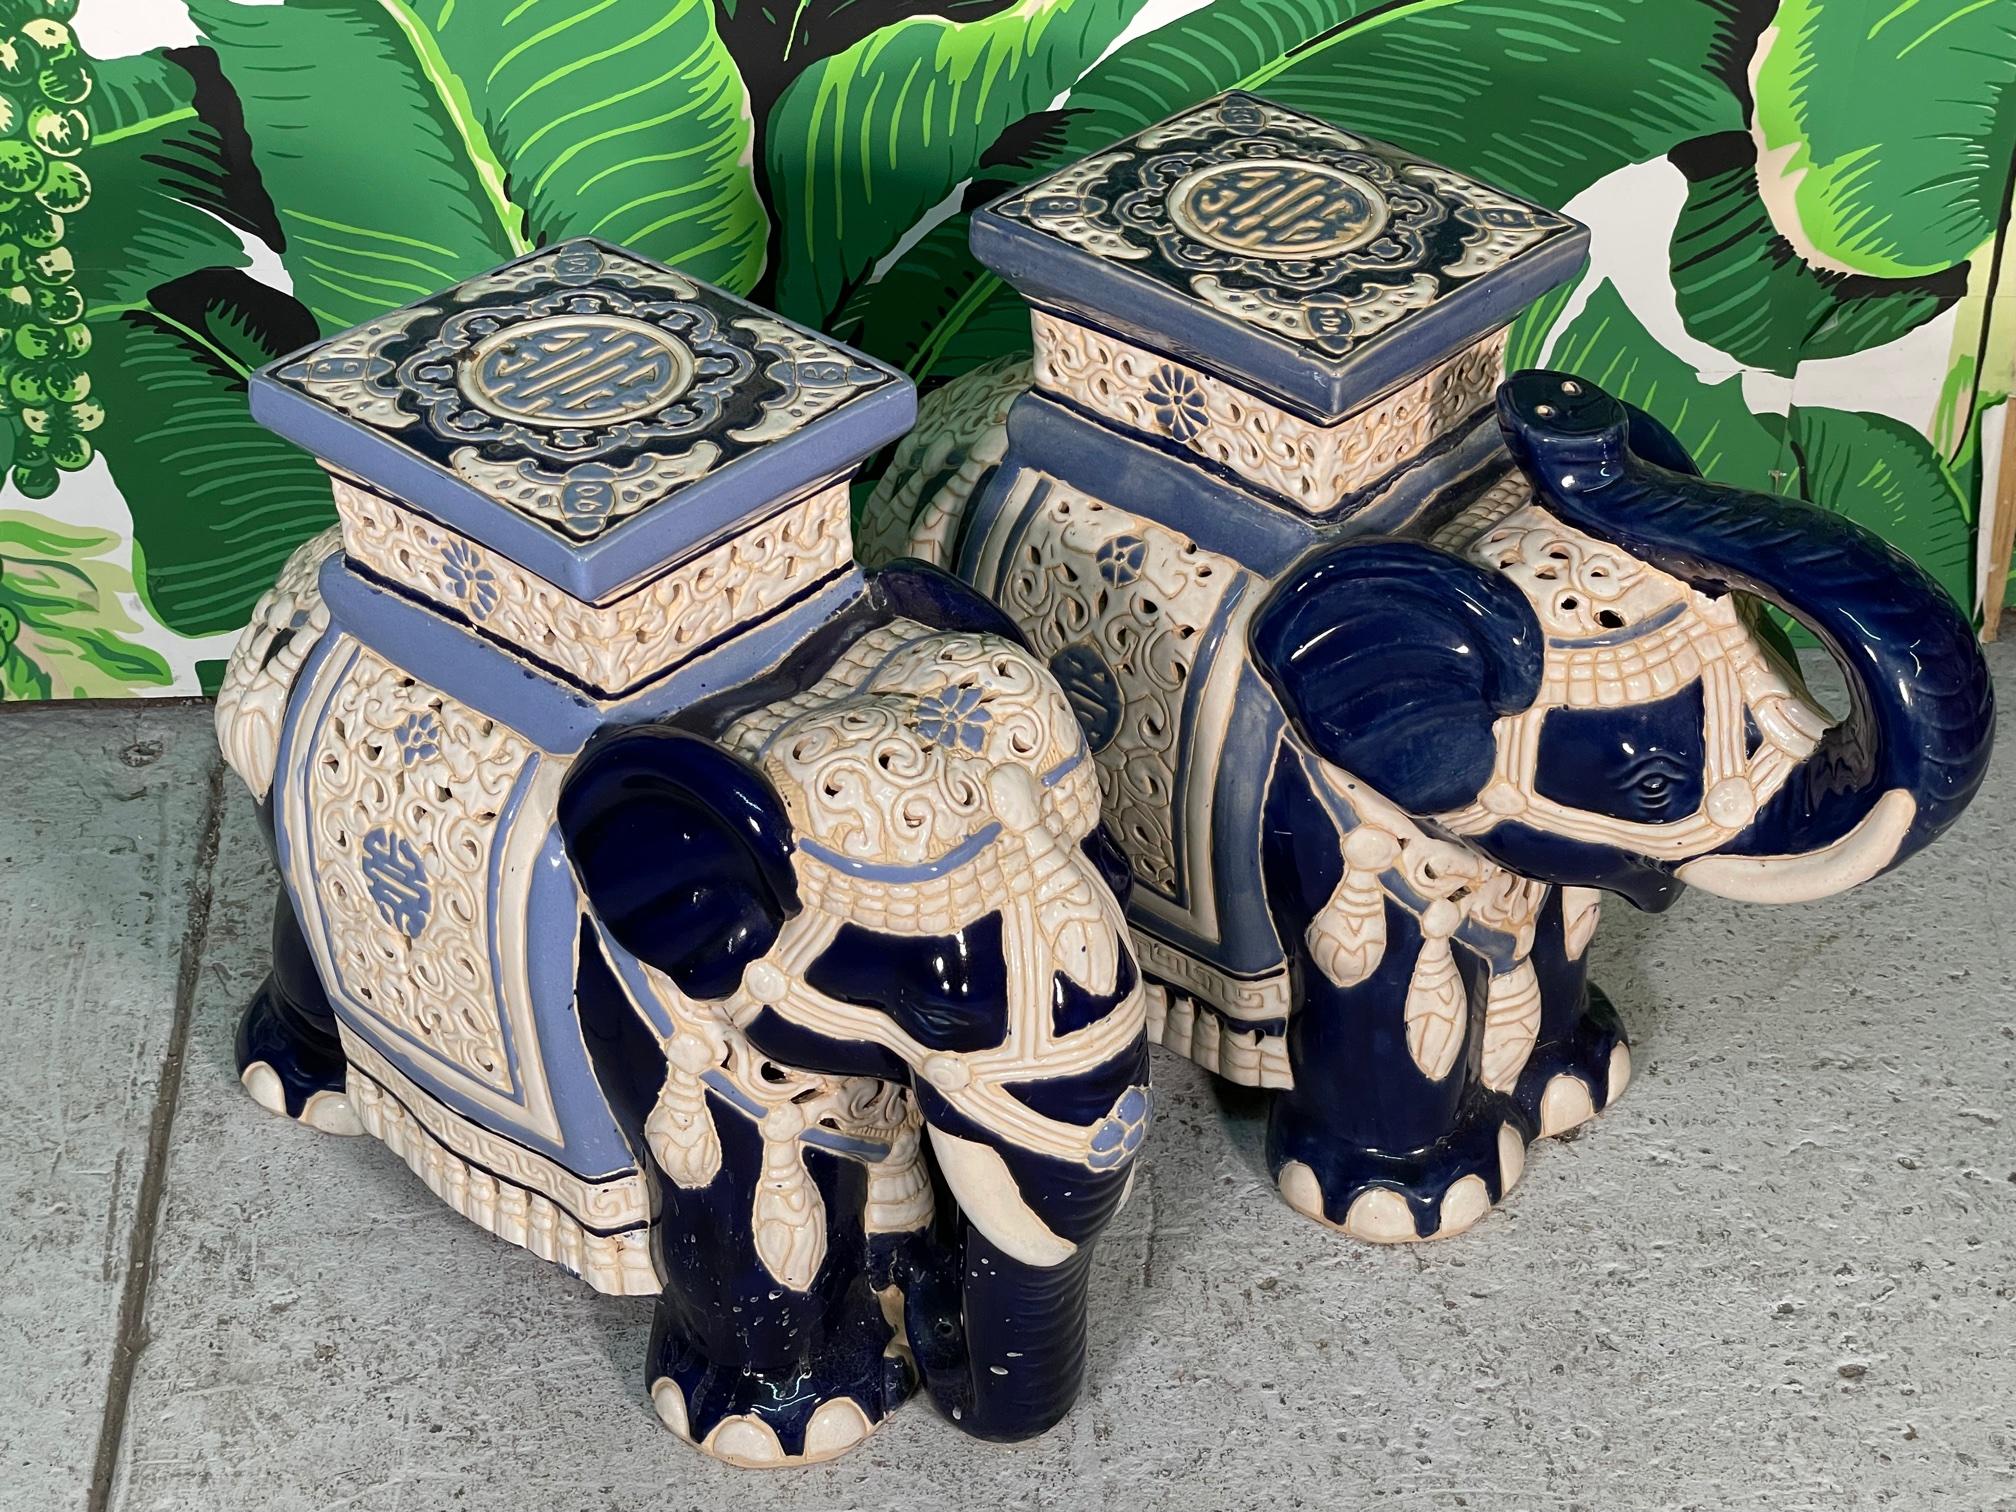 Pair of large ceramic elephant garden stools feature an open reticulated style design and high gloss finish. Beautiful deep blue color highlighted by lighter blues and eggshell coloring. Good condition with only very minor imperfections consistent